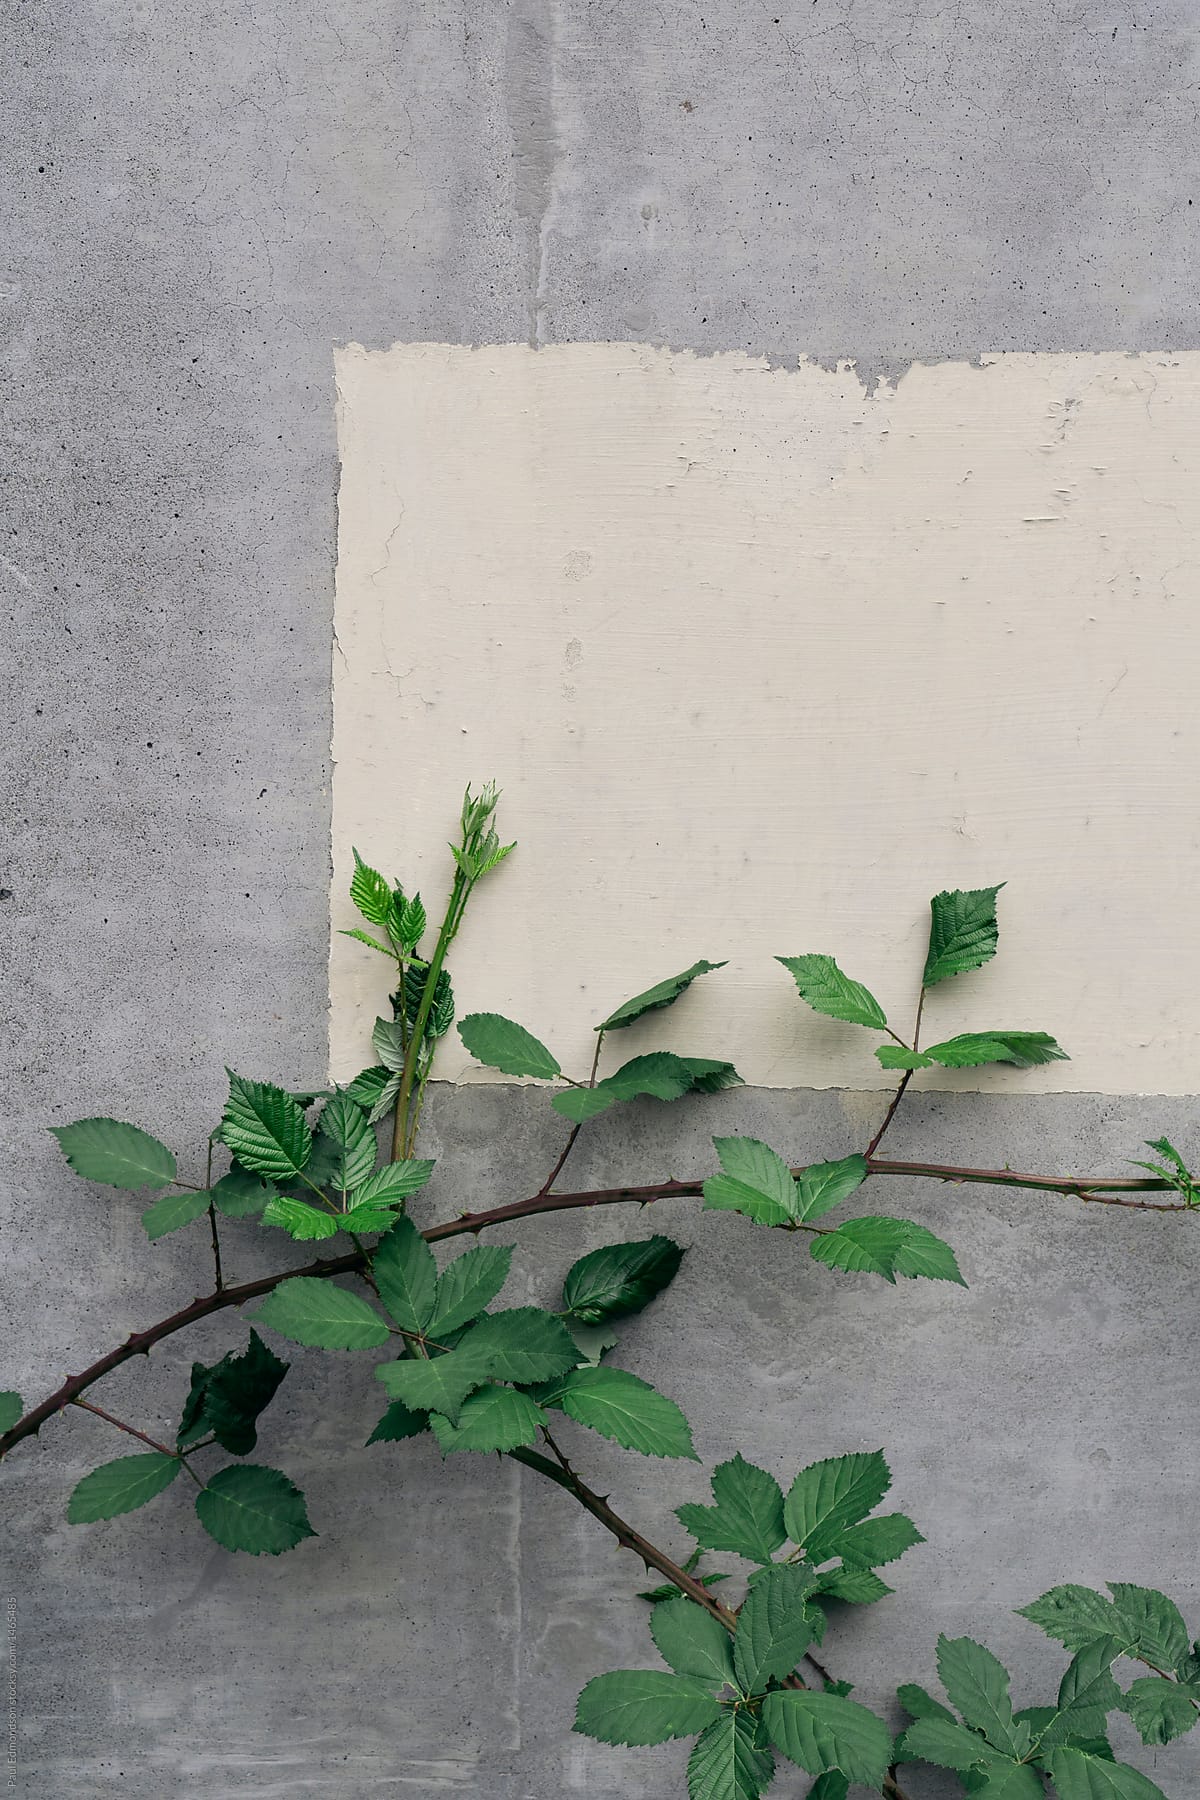 Blackberry vine growing against paint covered building wall